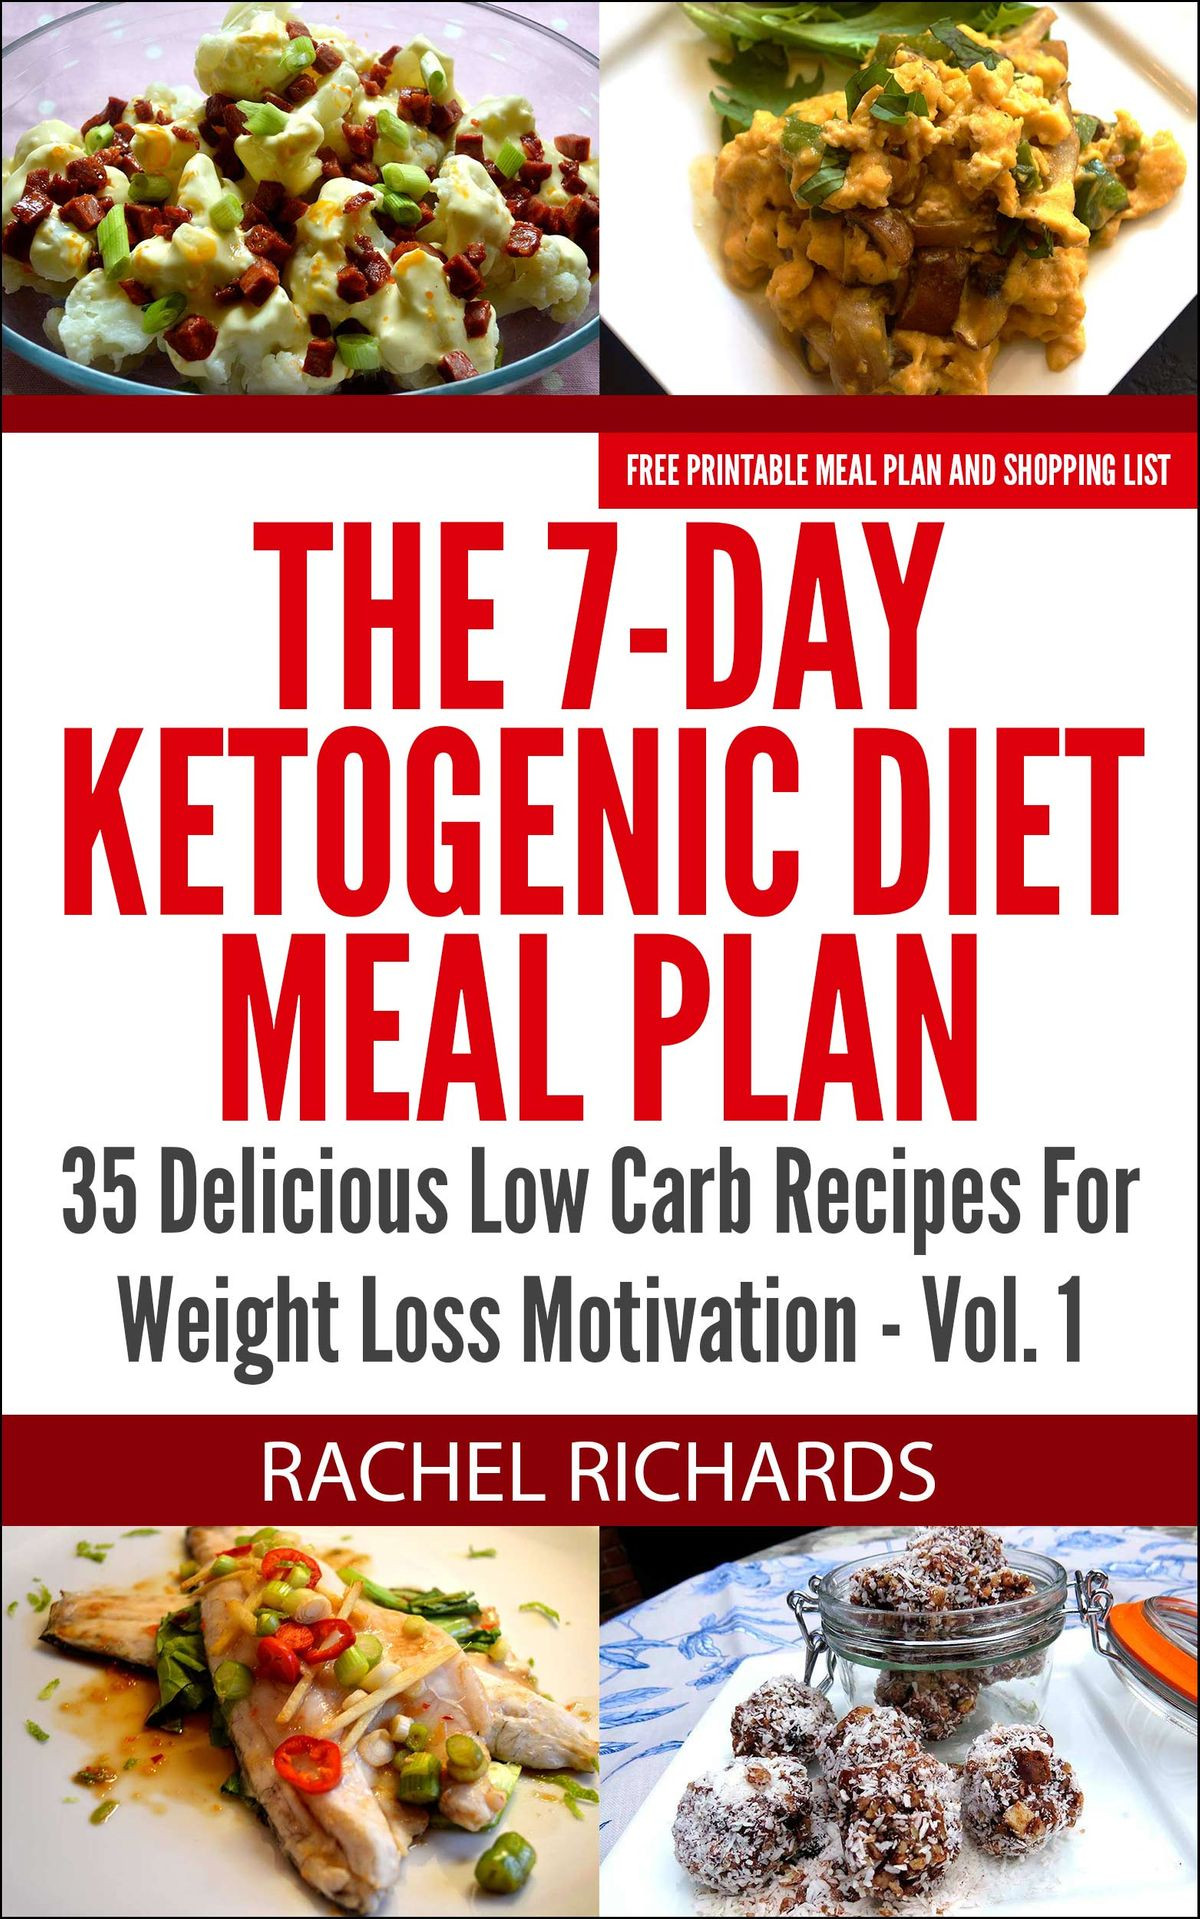 Low Carb Diet Meal Plan Losing Weight
 The 7 Day Ketogenic Diet Meal Plan 35 Delicious Low Carb